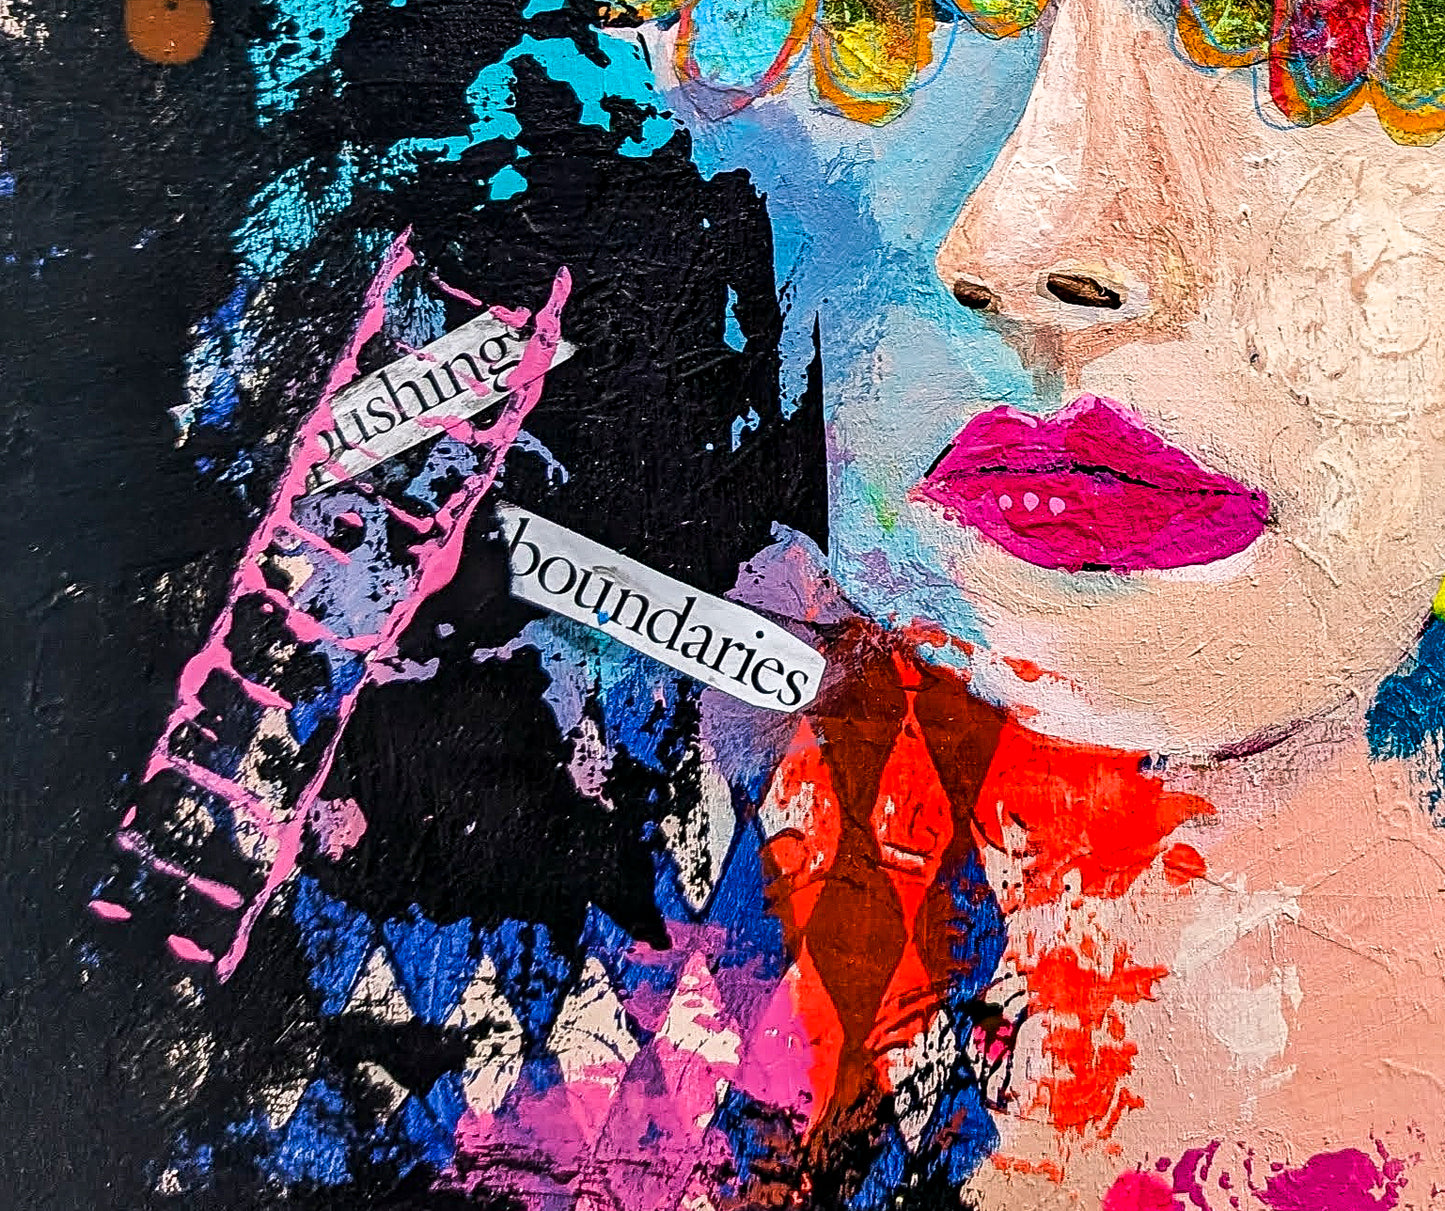 Close up view of Rebel's face and the mixed media elements of the painting which include the cut out words "pushing" and "boundries"